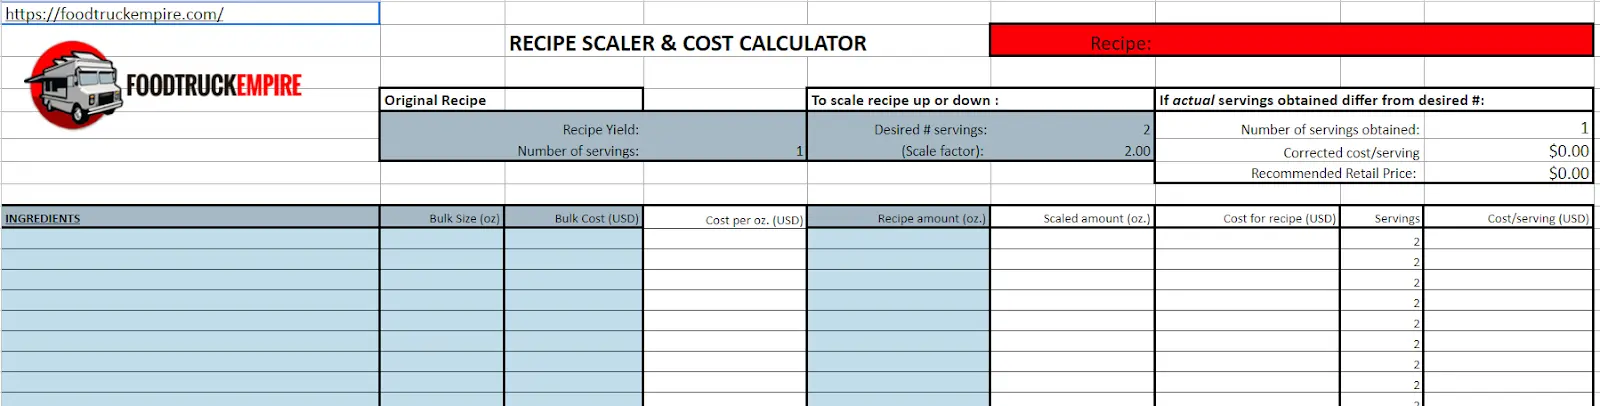 Food Truck Empire's recipe costing template